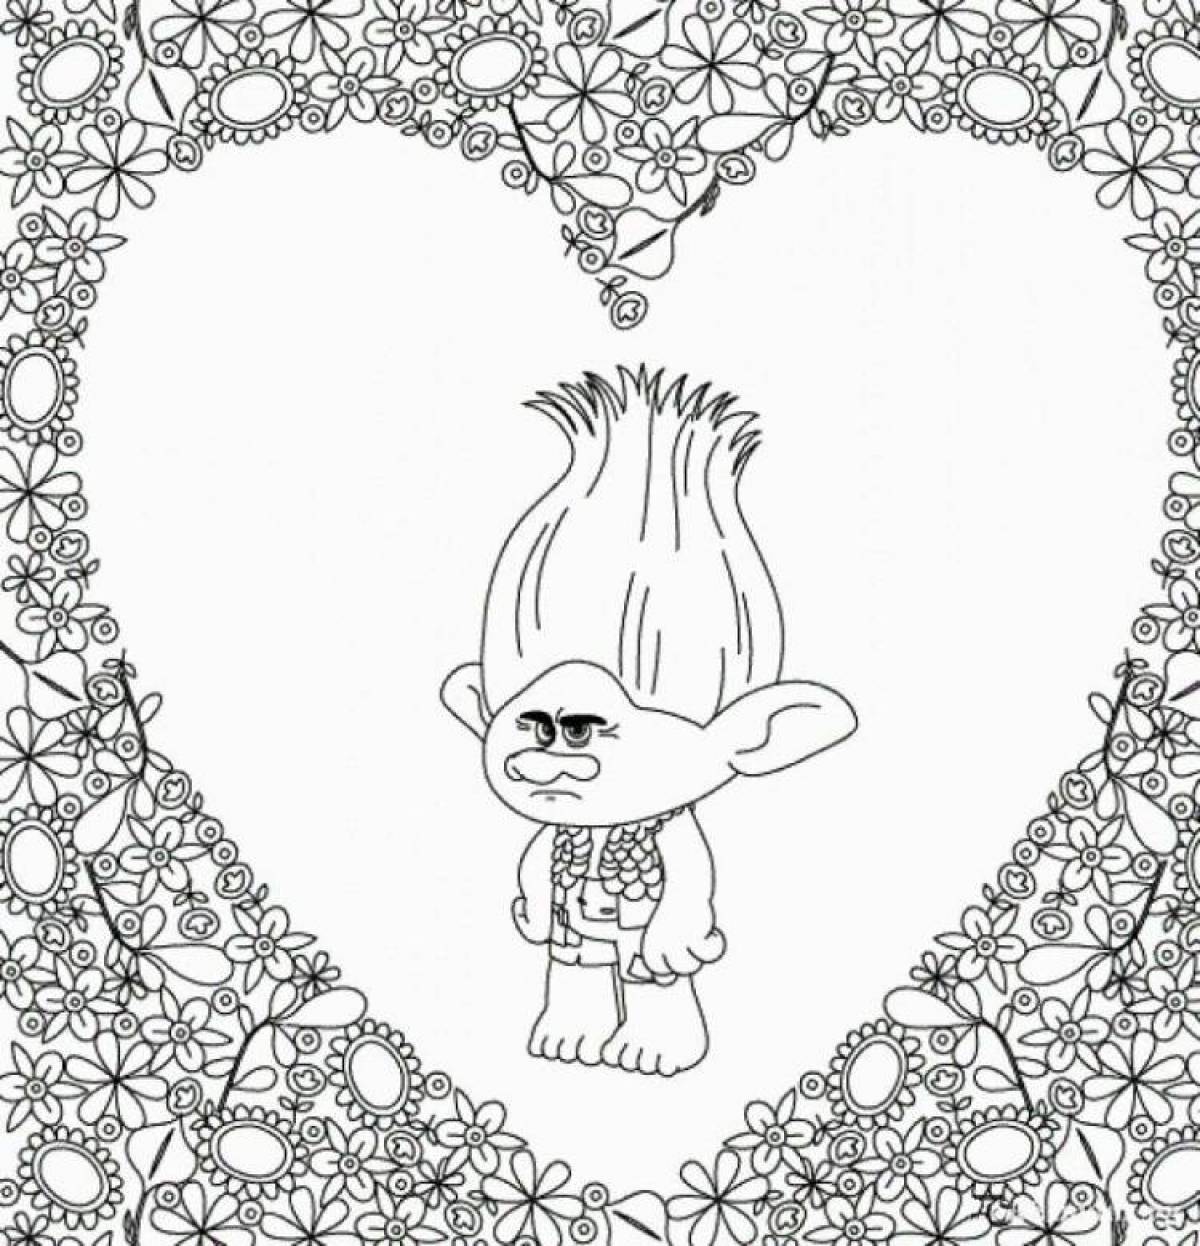 Awesome lalafan coloring page